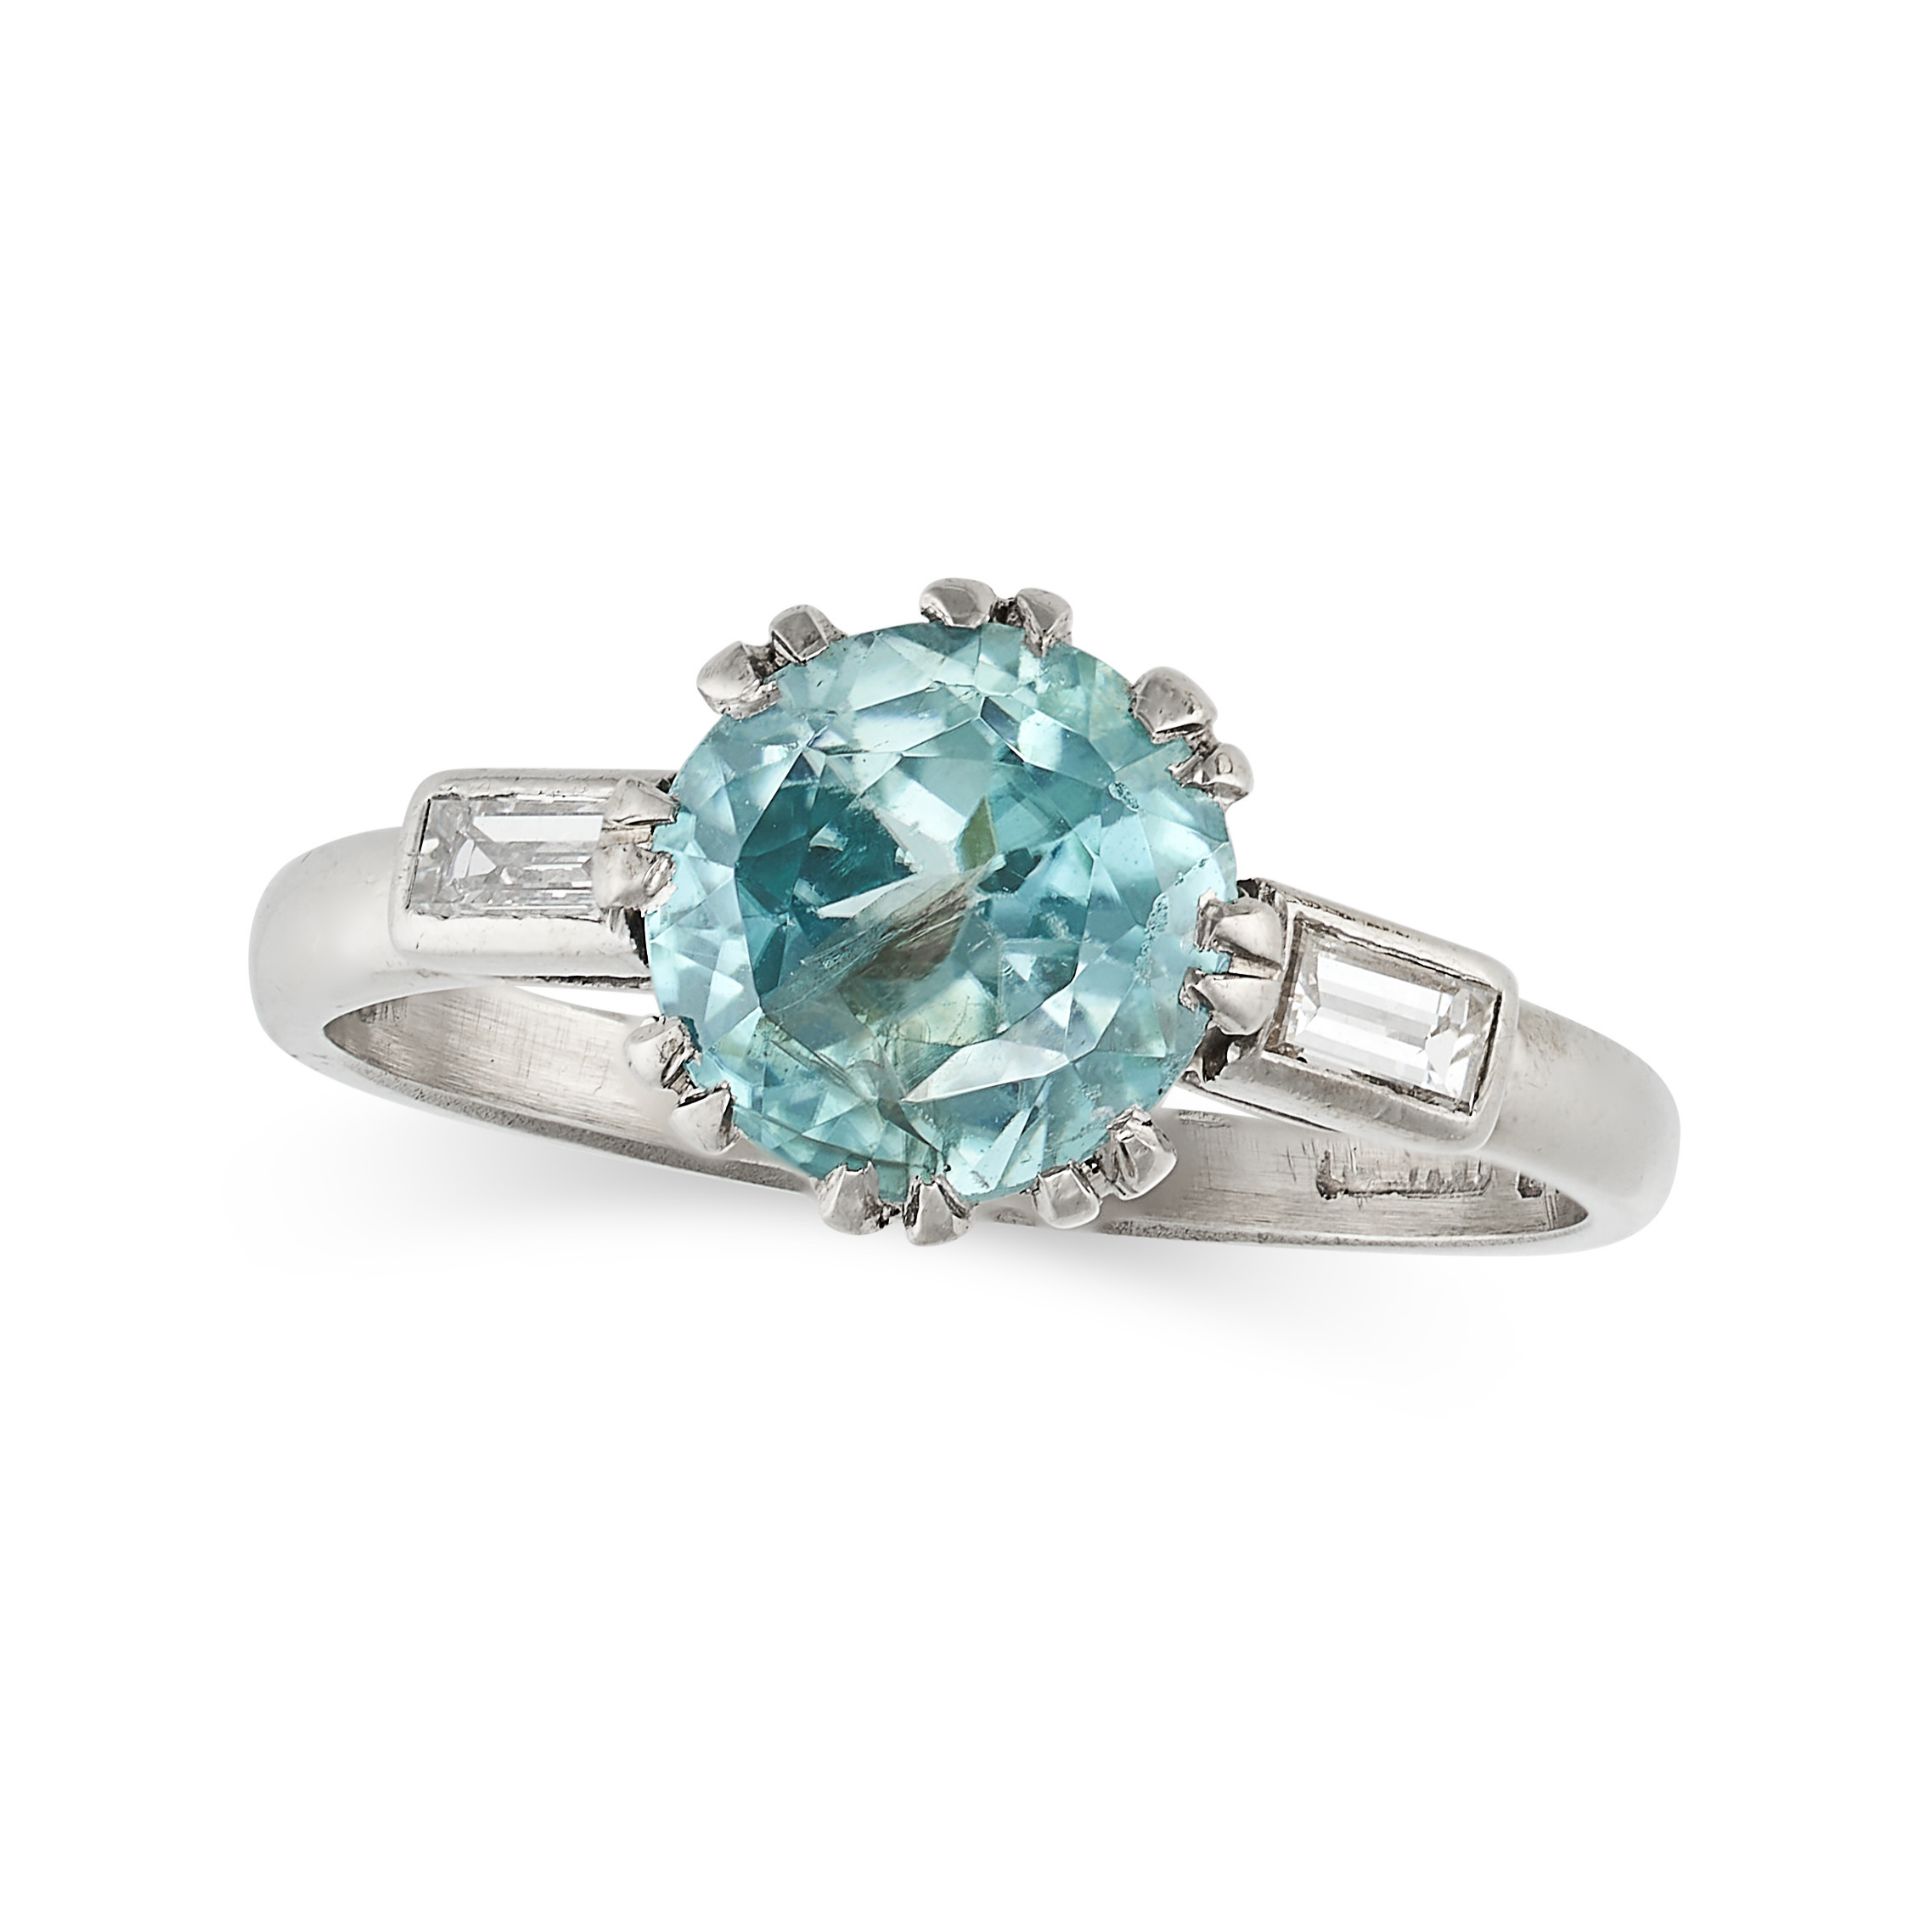 ALBION, A BLUE ZIRCON AND DIAMOND RING in 18ct white gold, set with a round cut zircon between ba...